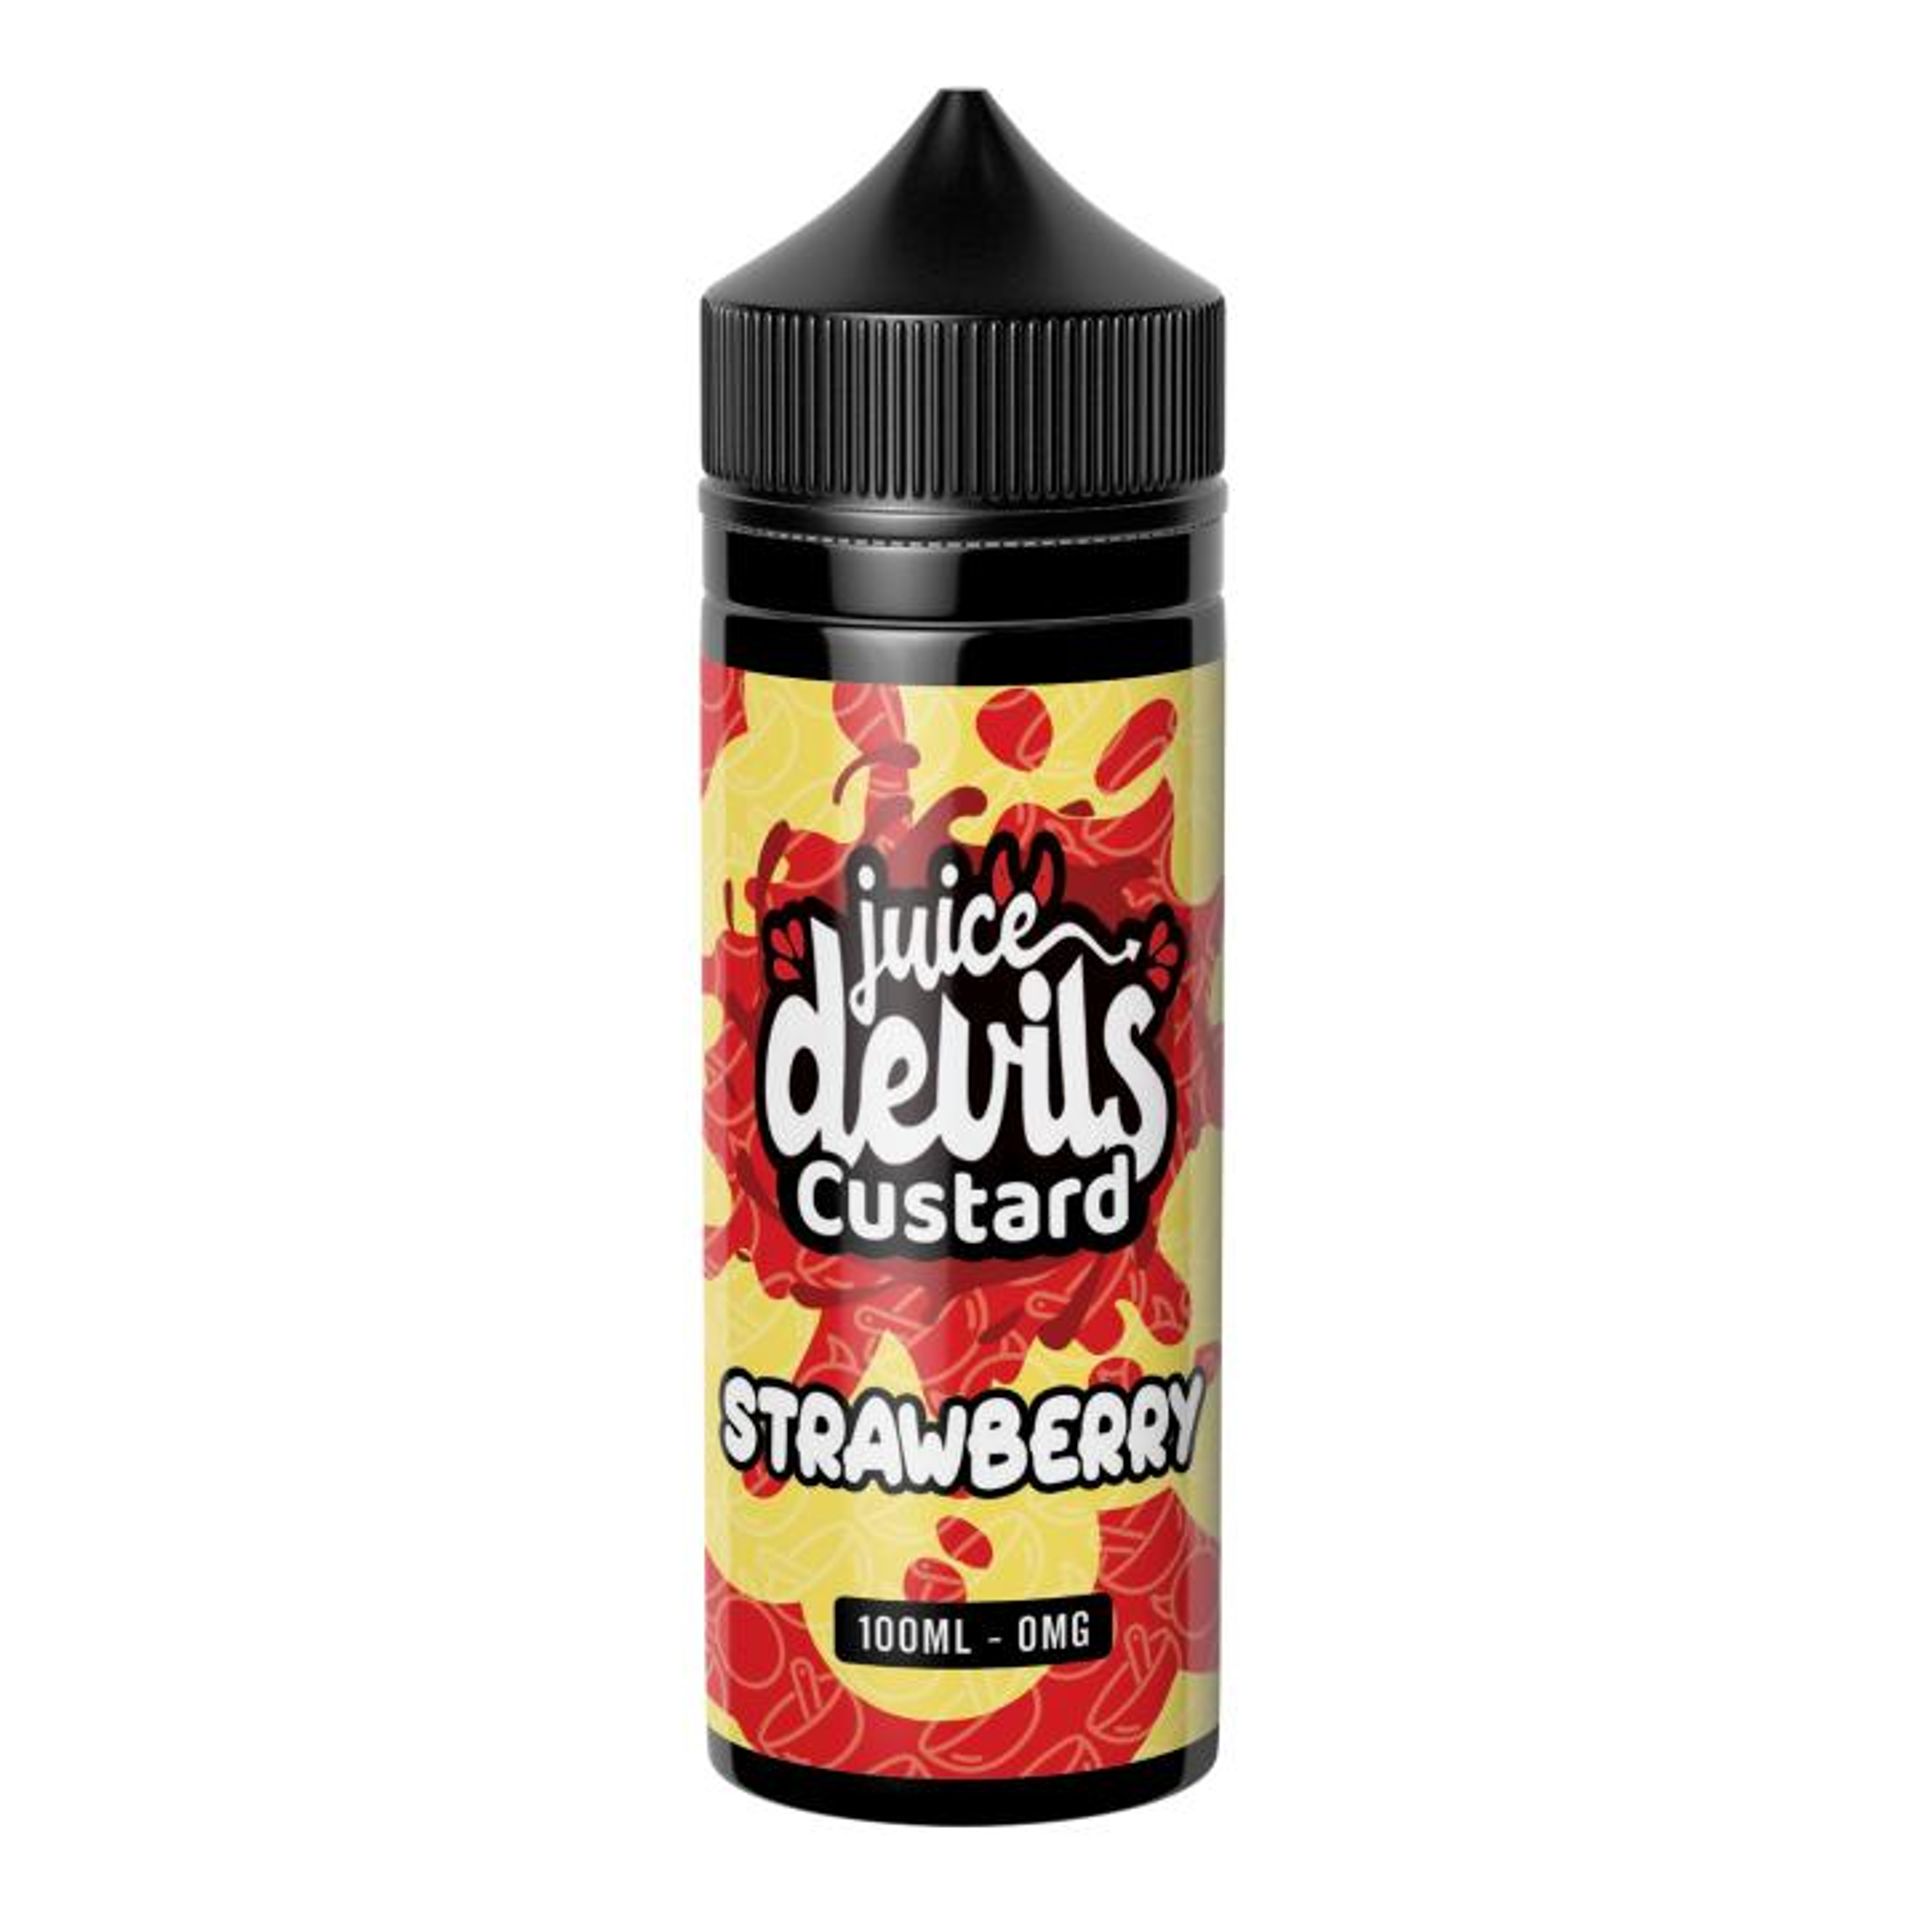 Image of Strawberry Custard by Juice Devils